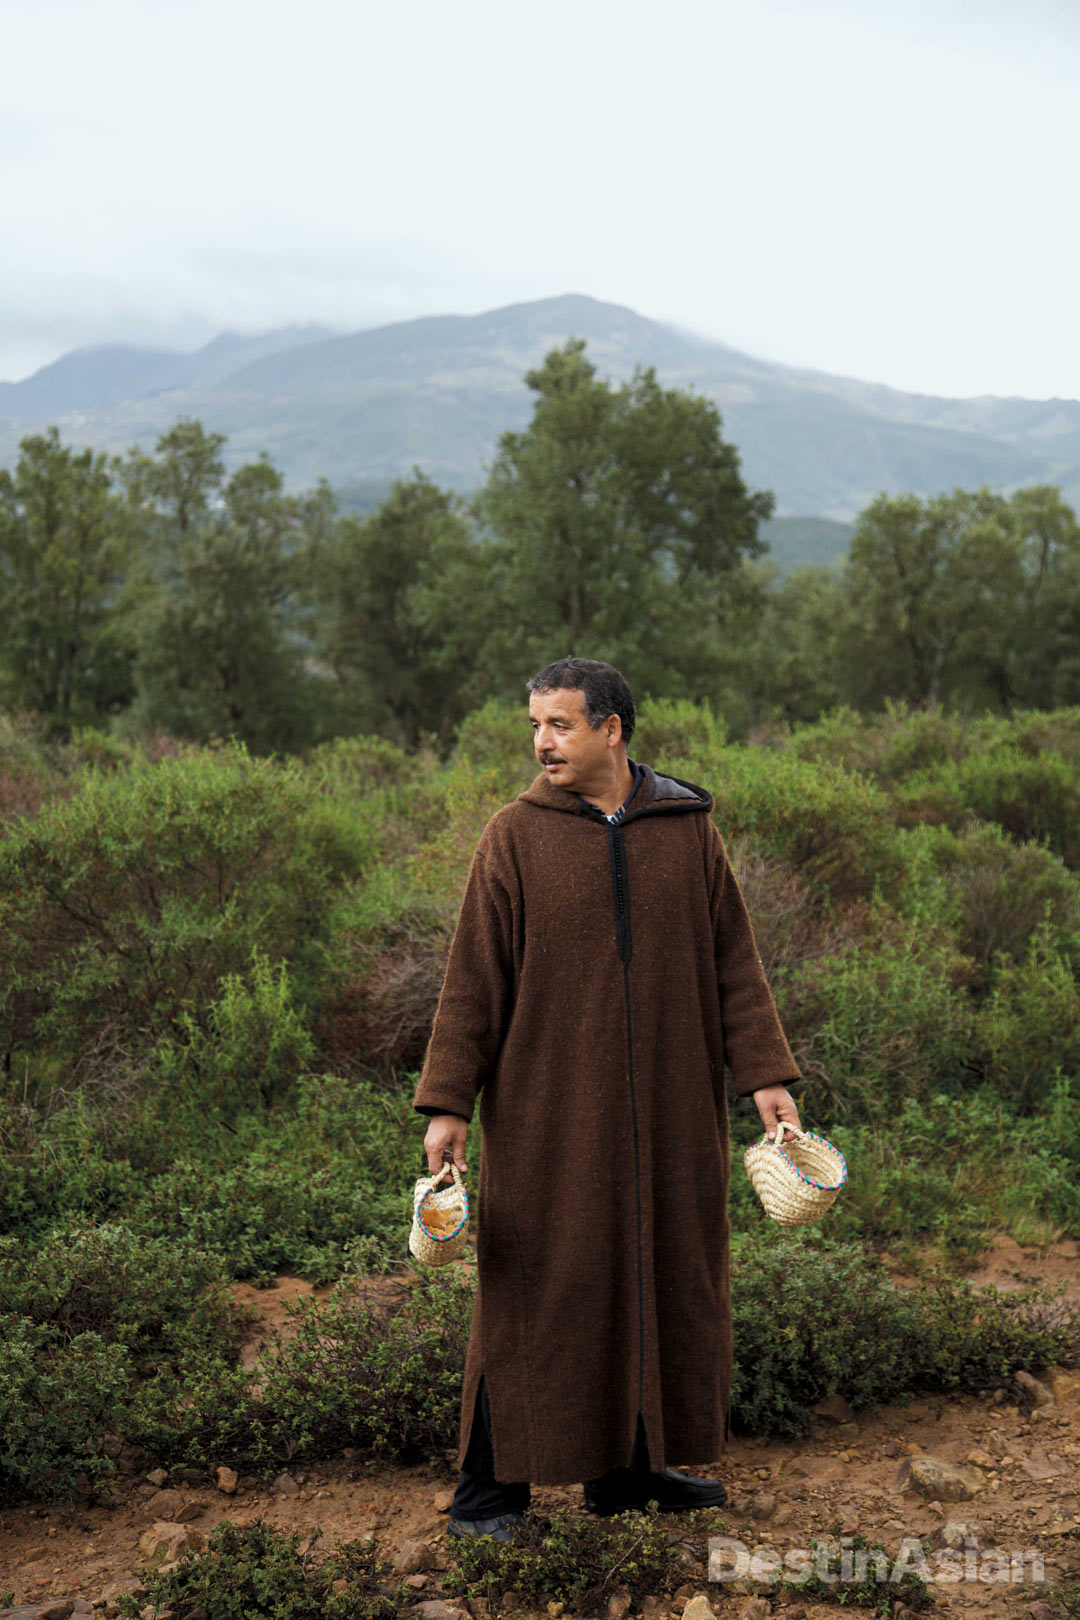 Local forager and mushroom expert Mohammed Elafia in the mountains near Chefchaouen.